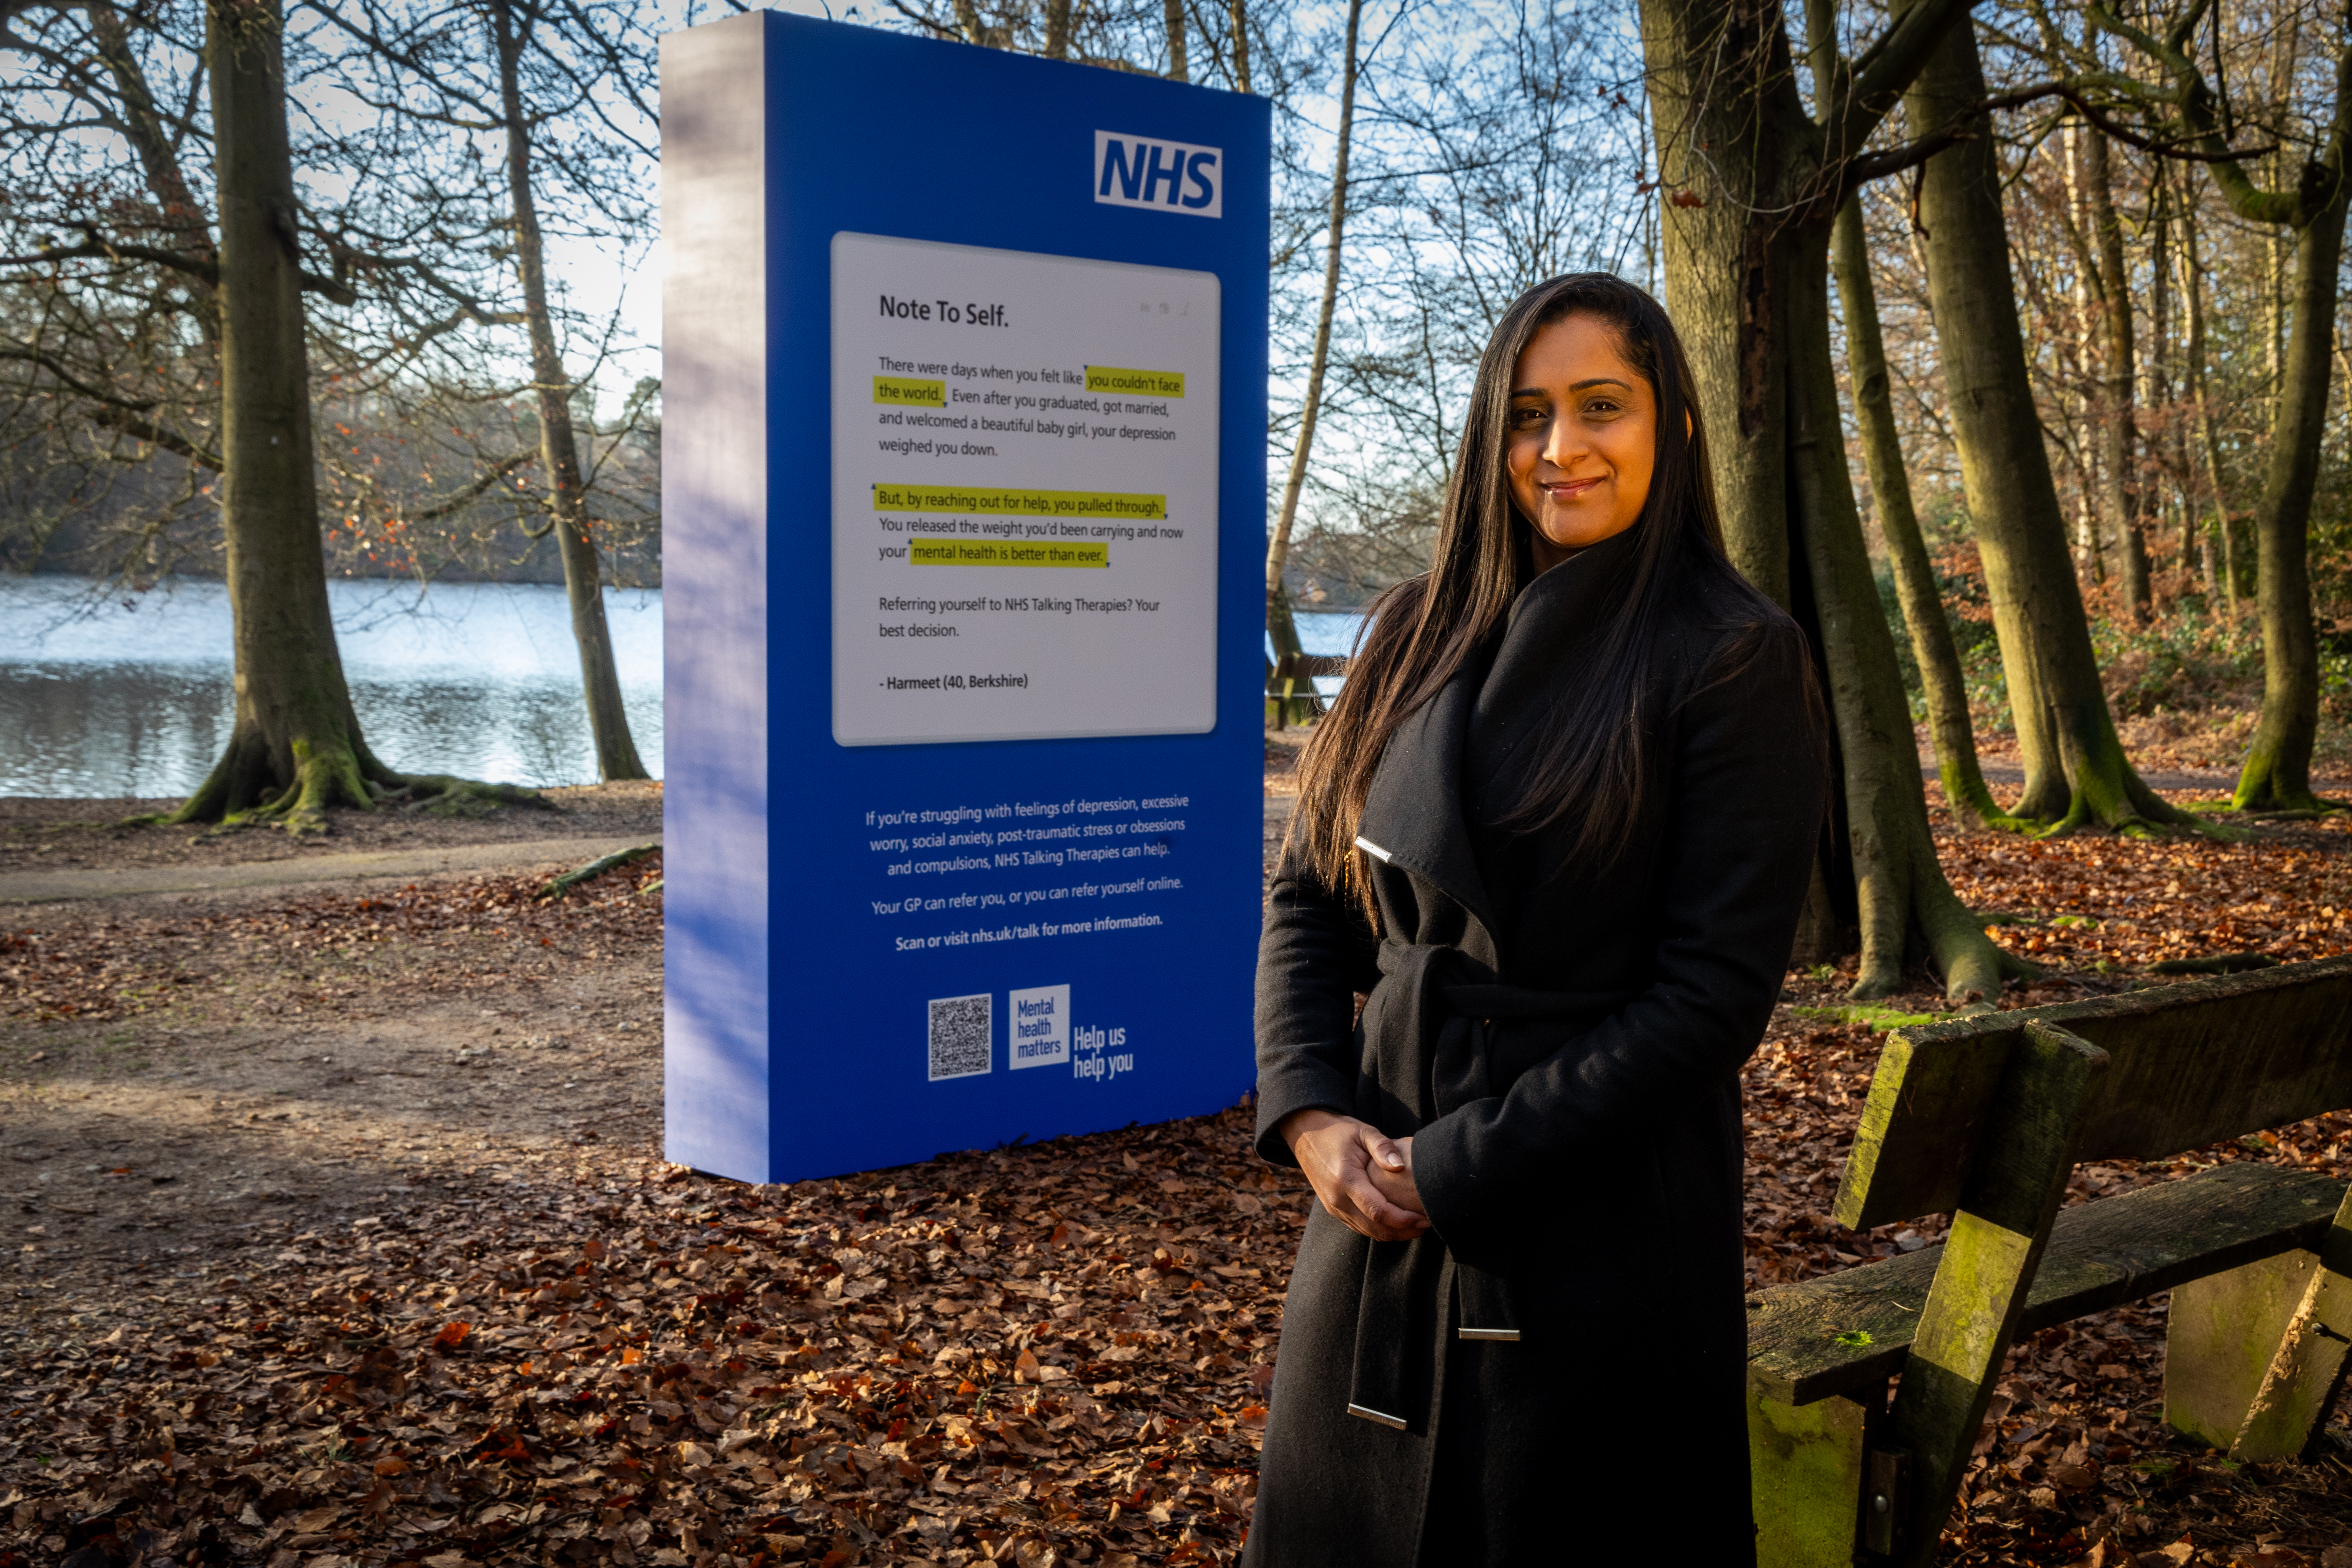 Harmeet stands in front of the NHS Talking Therapies public display in Black Park